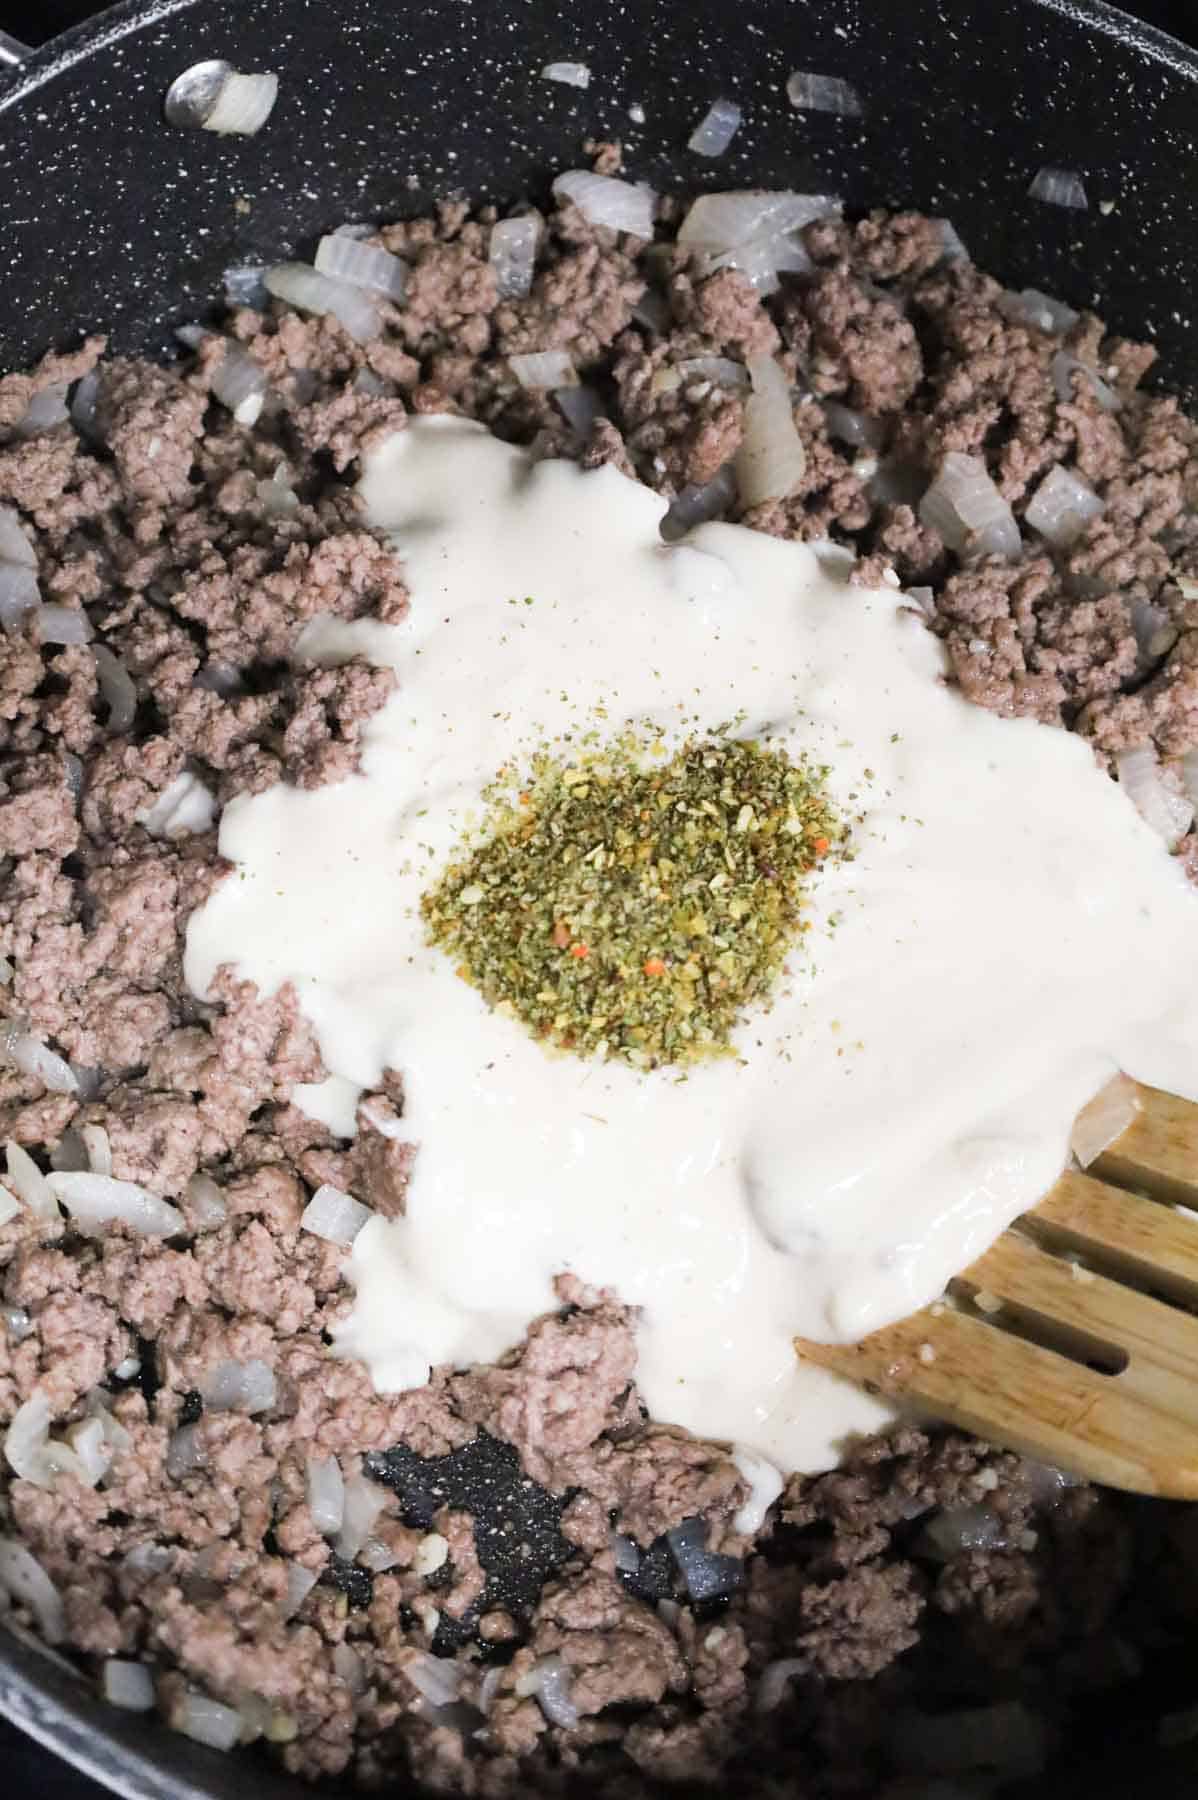 Italian seasoning and alfredo sauce on top of cooked ground beef in a skillet